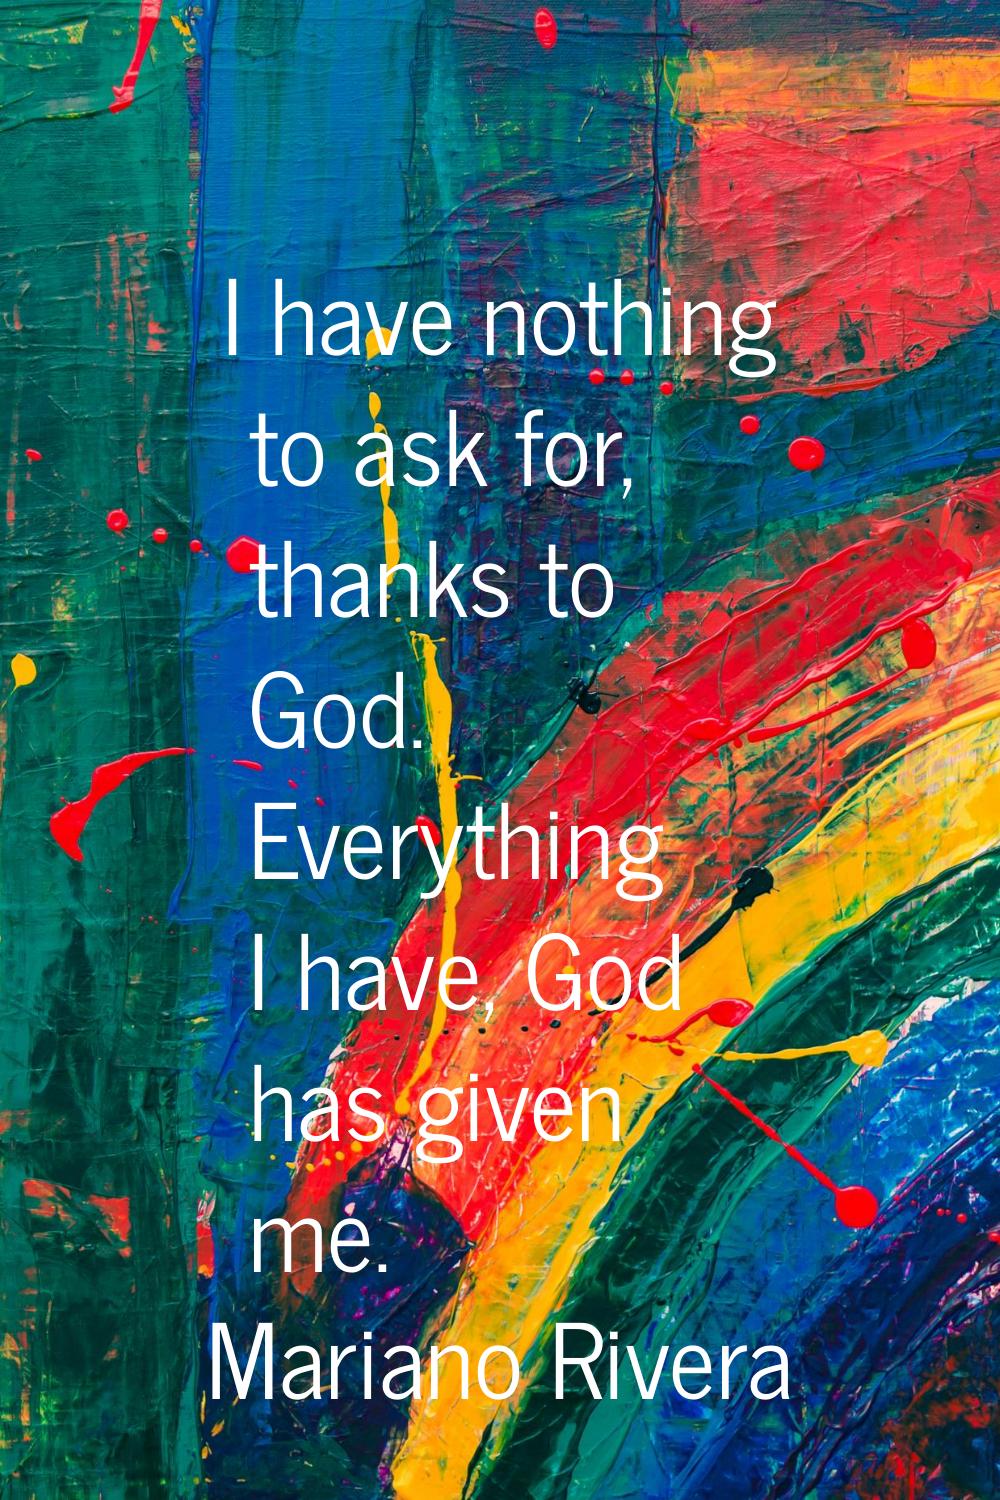 I have nothing to ask for, thanks to God. Everything I have, God has given me.